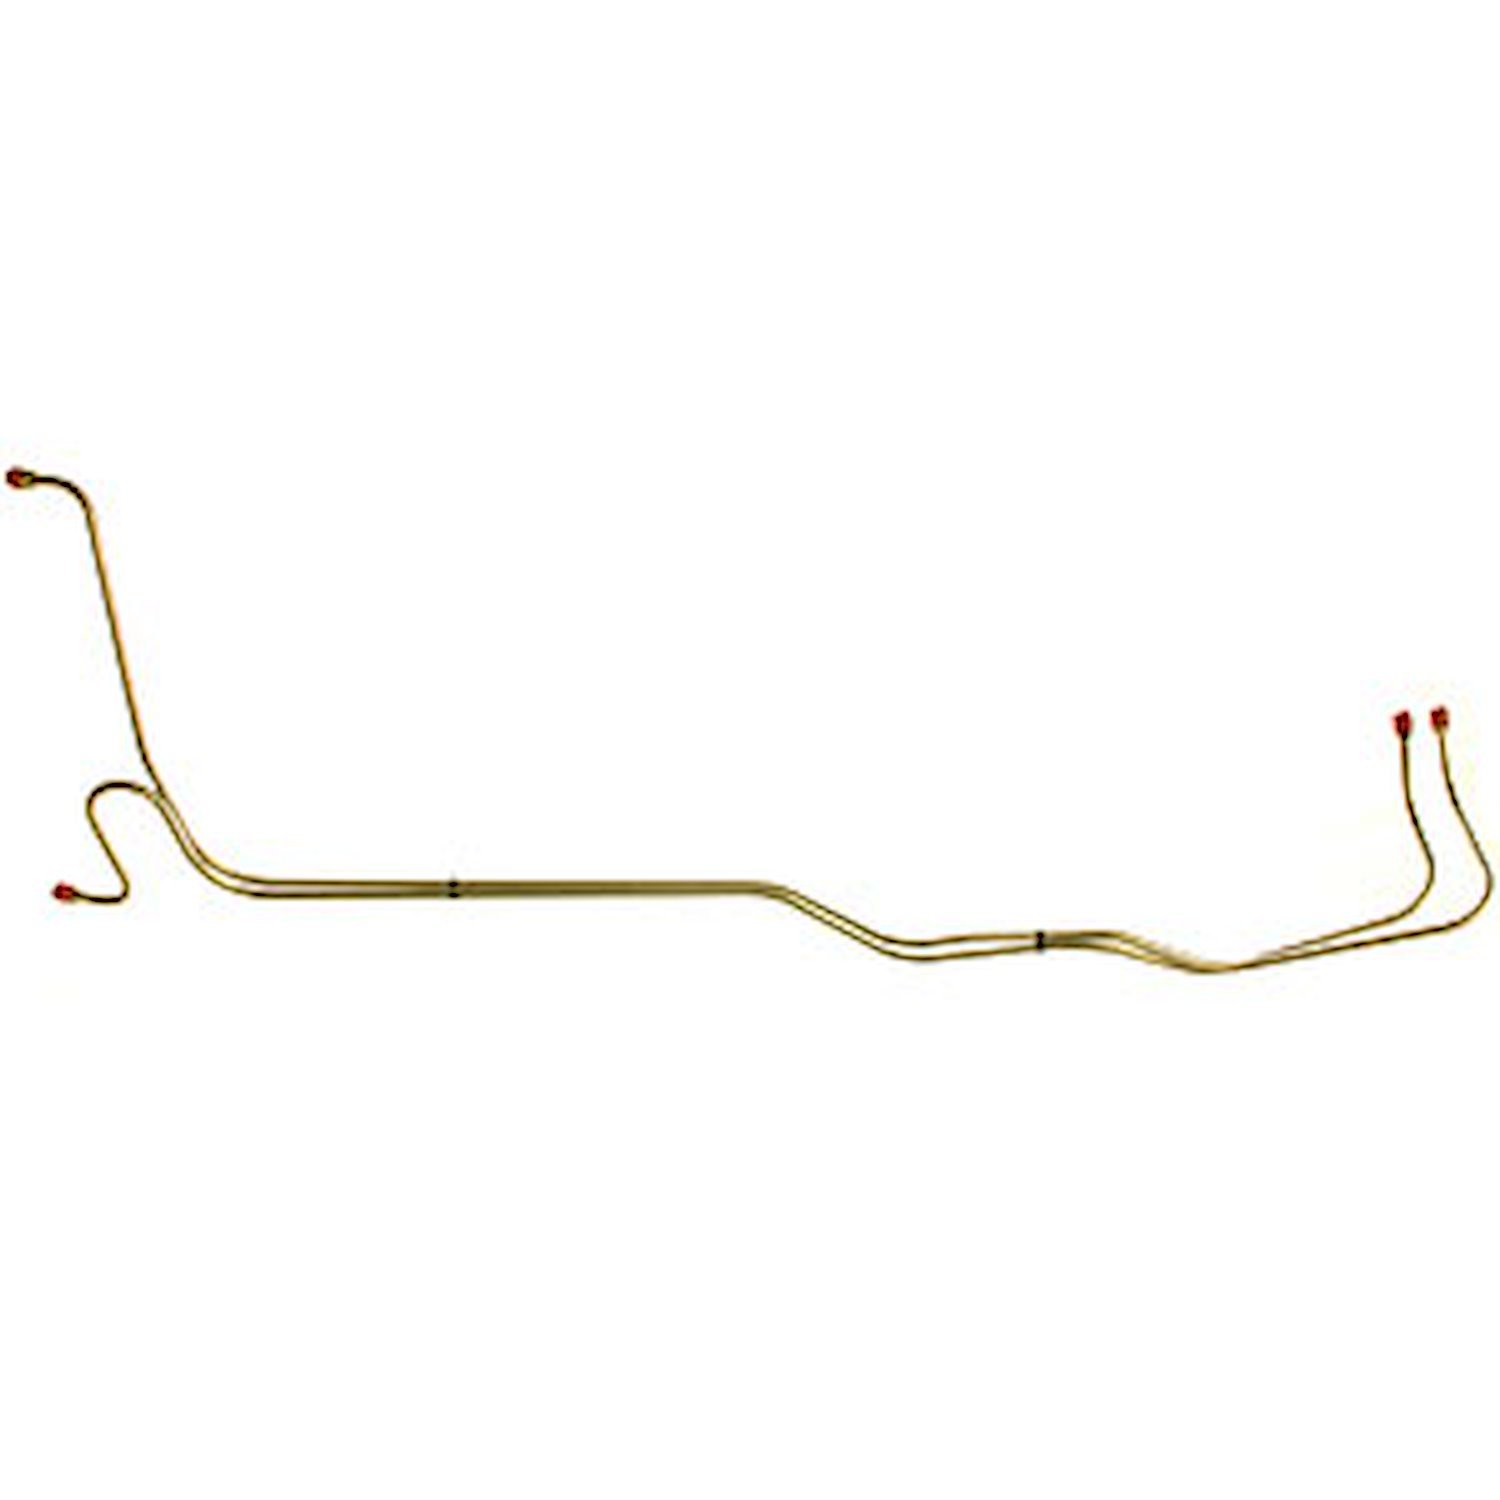 66 Chevy 12IN. Span Loop in Pass. Side - Trans. Cooling Lines 2 Pcs.